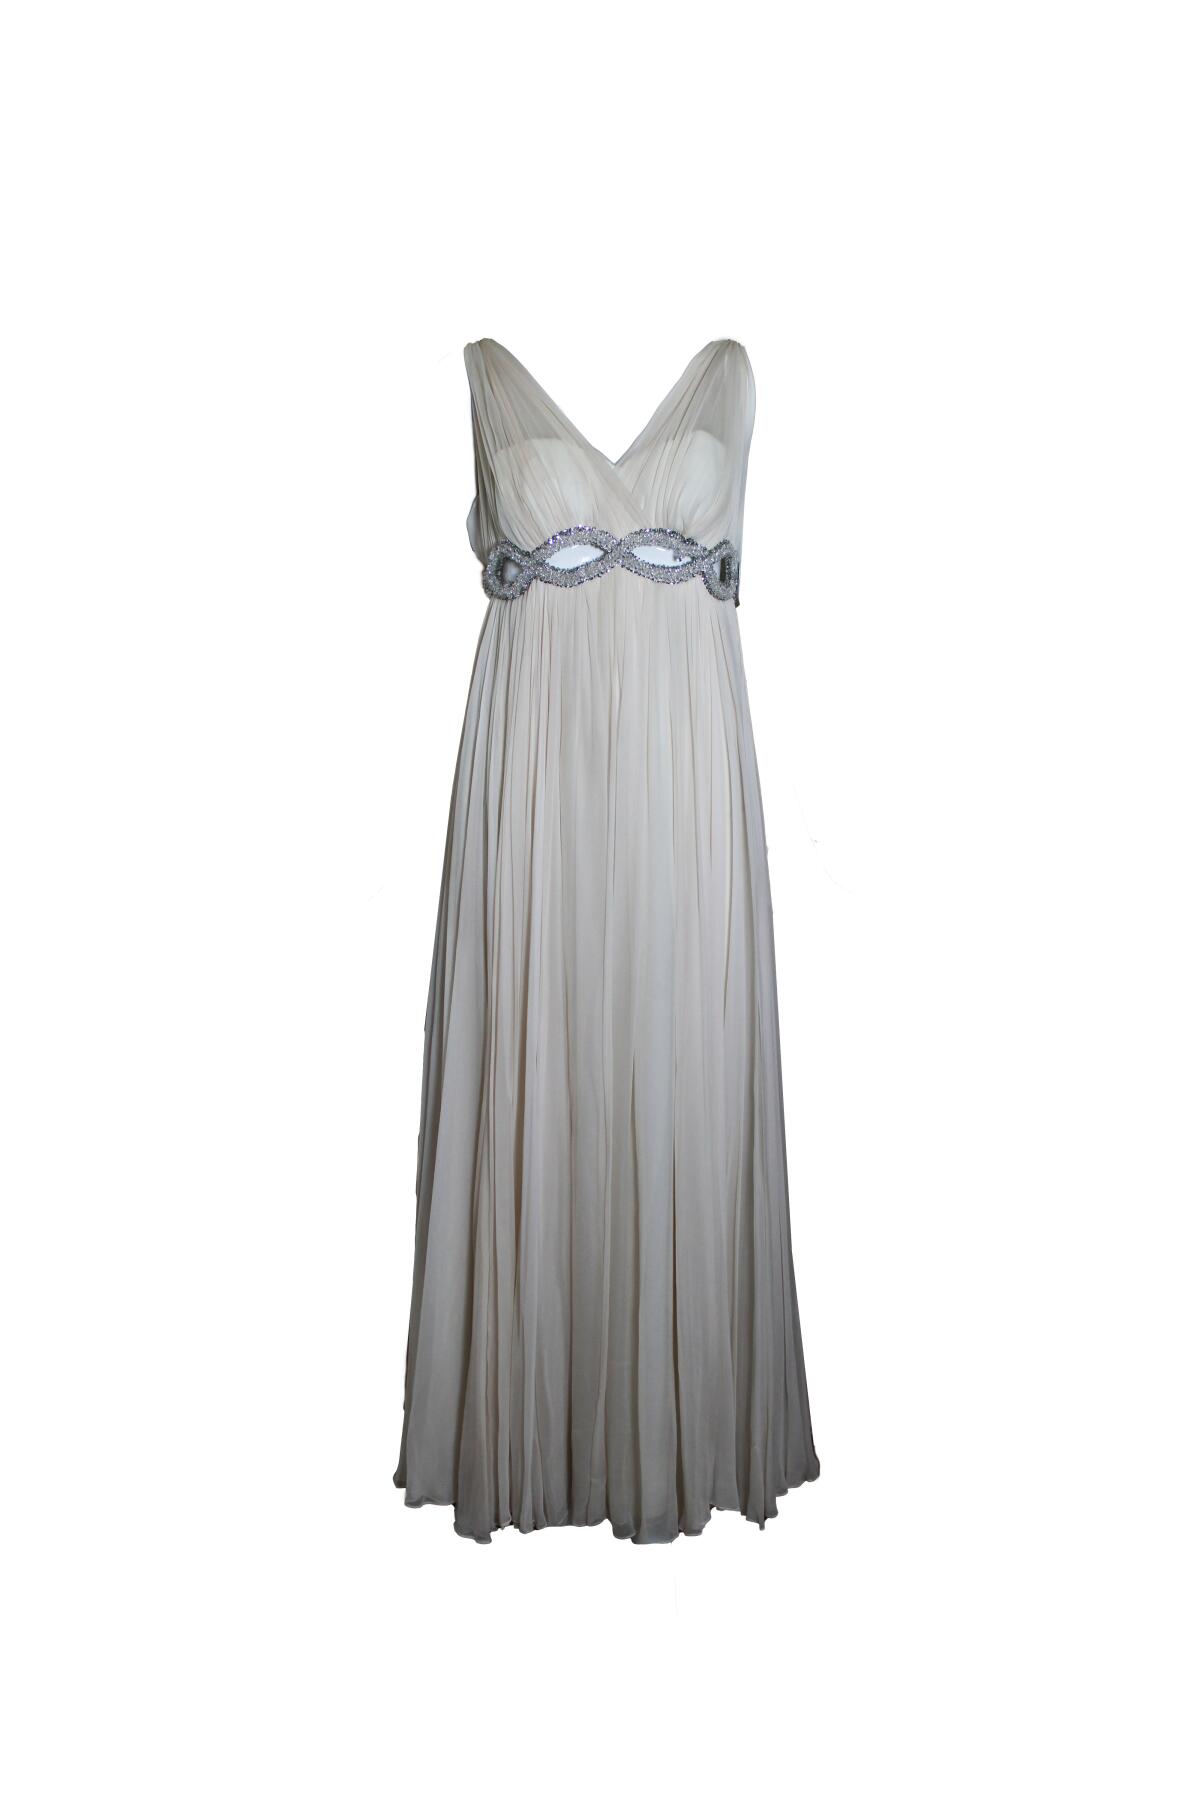 A Malcolm Starr white chiffon gown from the Way We Wore.